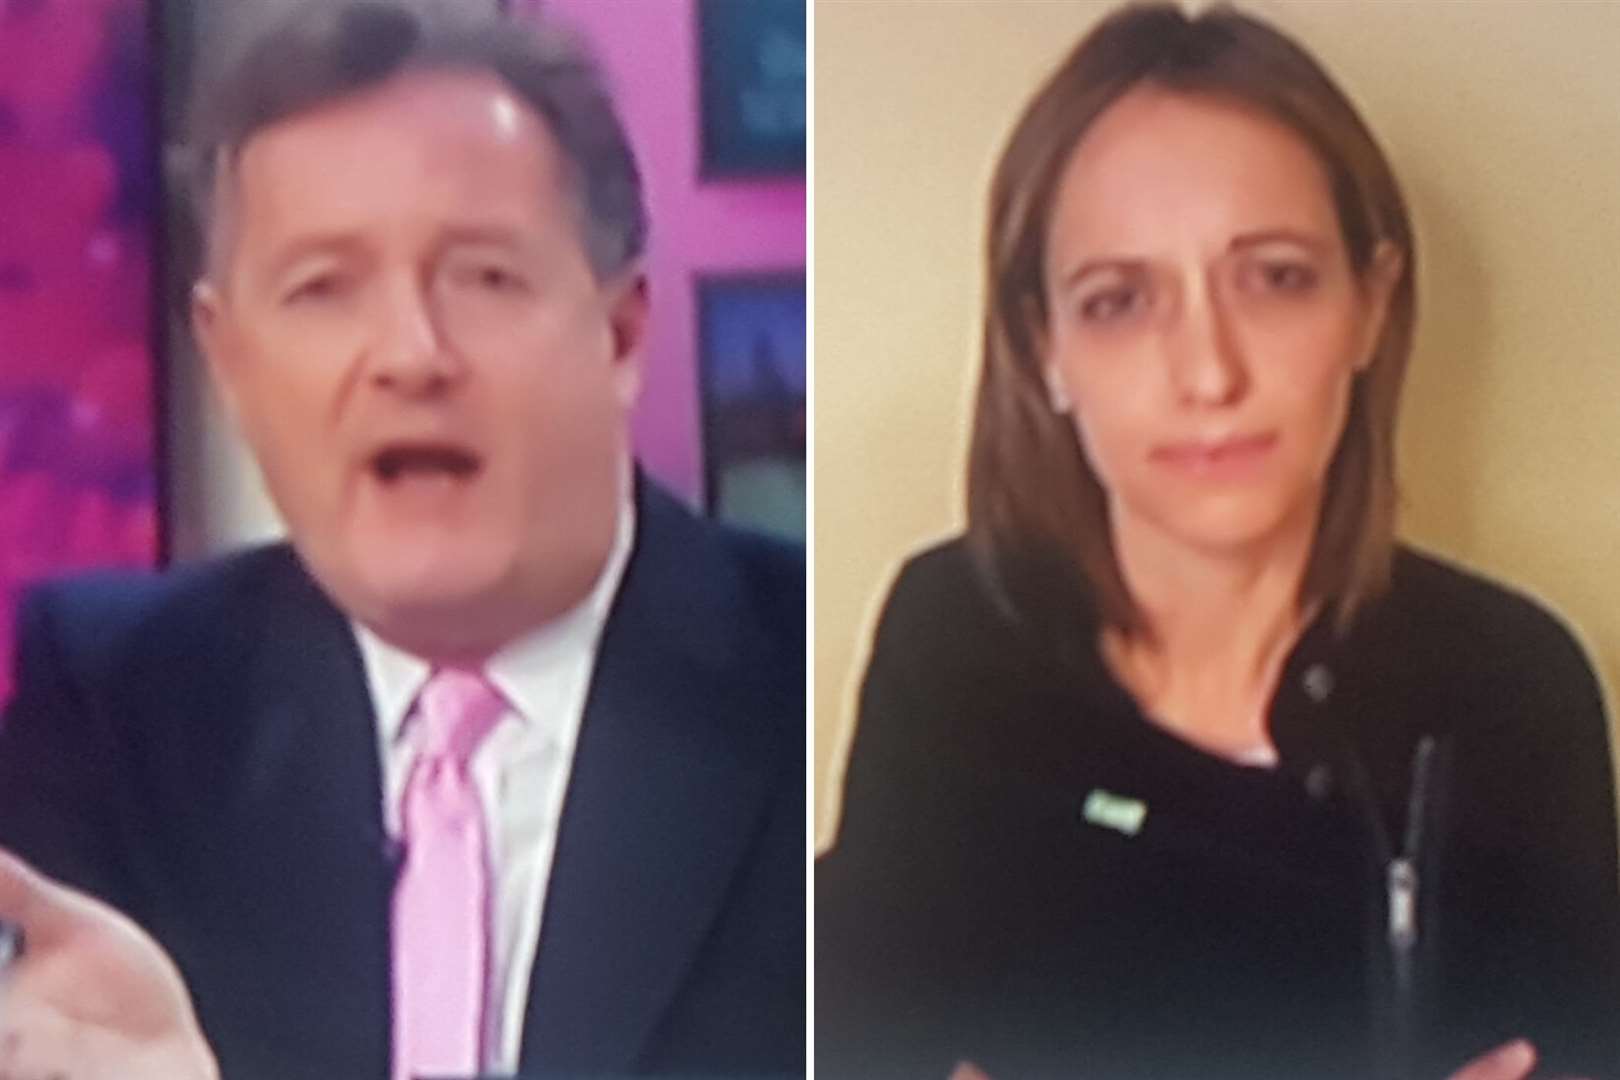 Piers Morgan clashed with Faversham MP Helen Whately on GMB in April